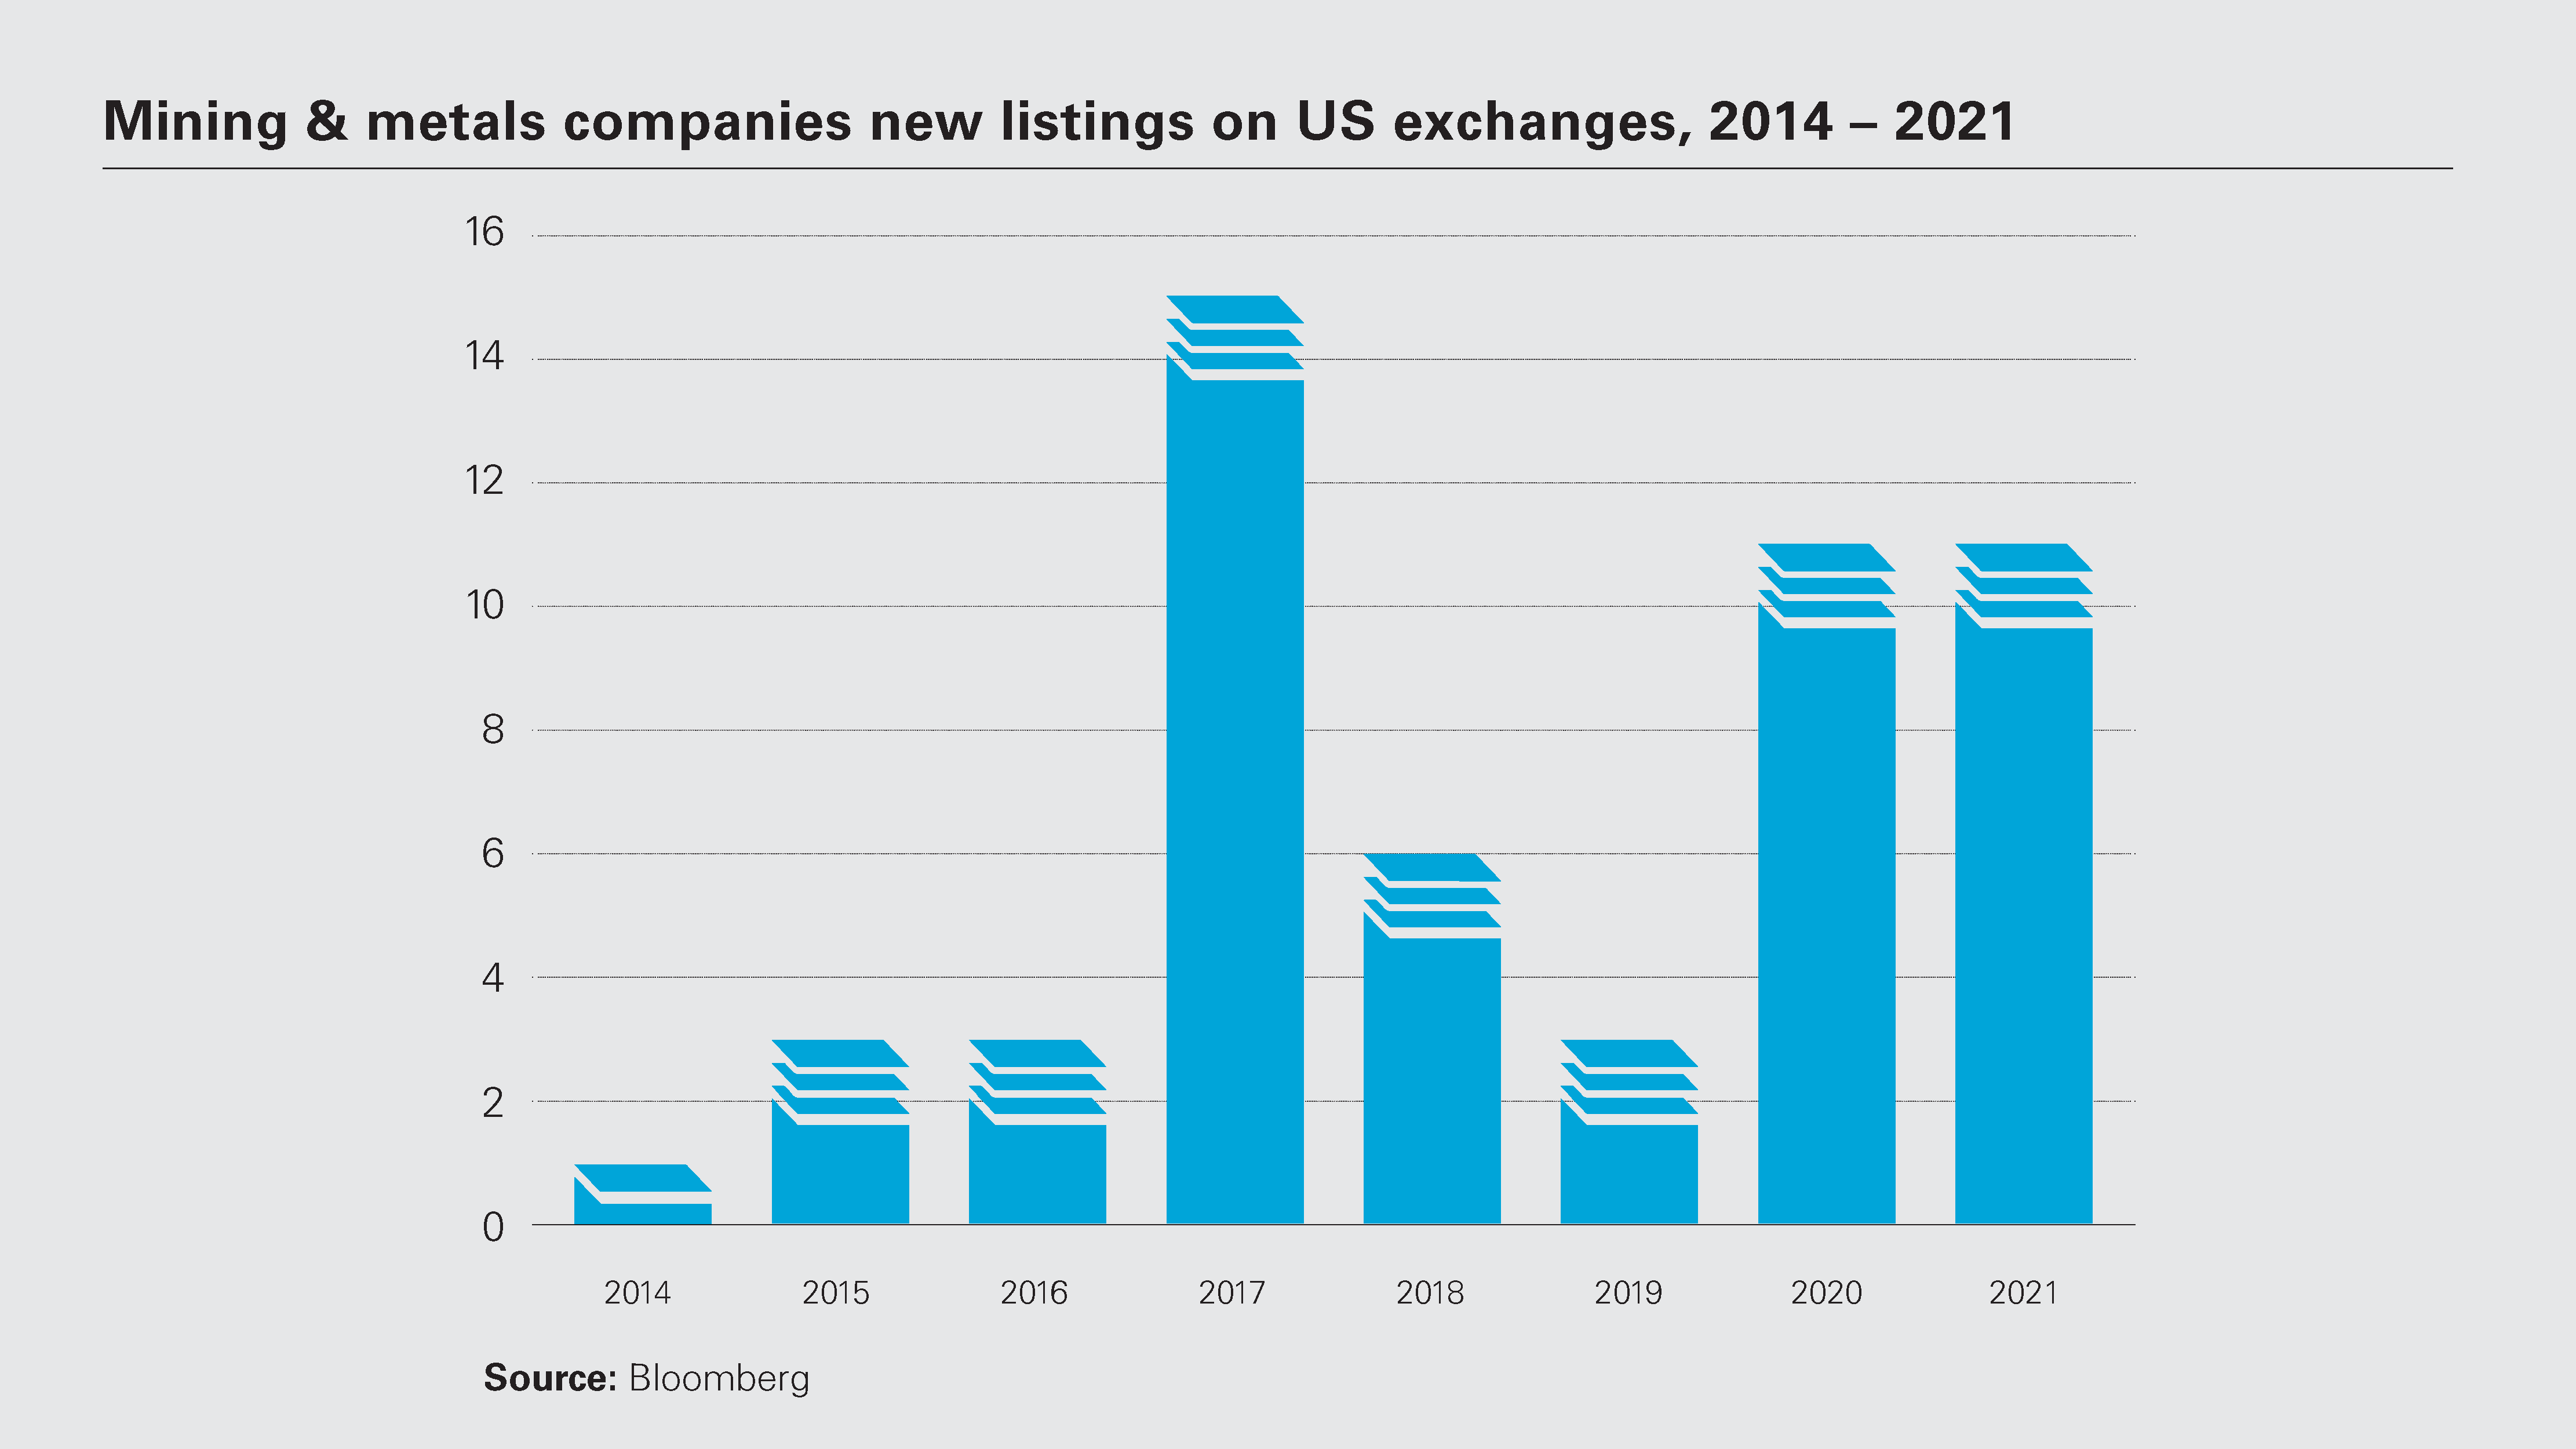 Mining & metals companies new listings on US exchanges, 2014 – 2021